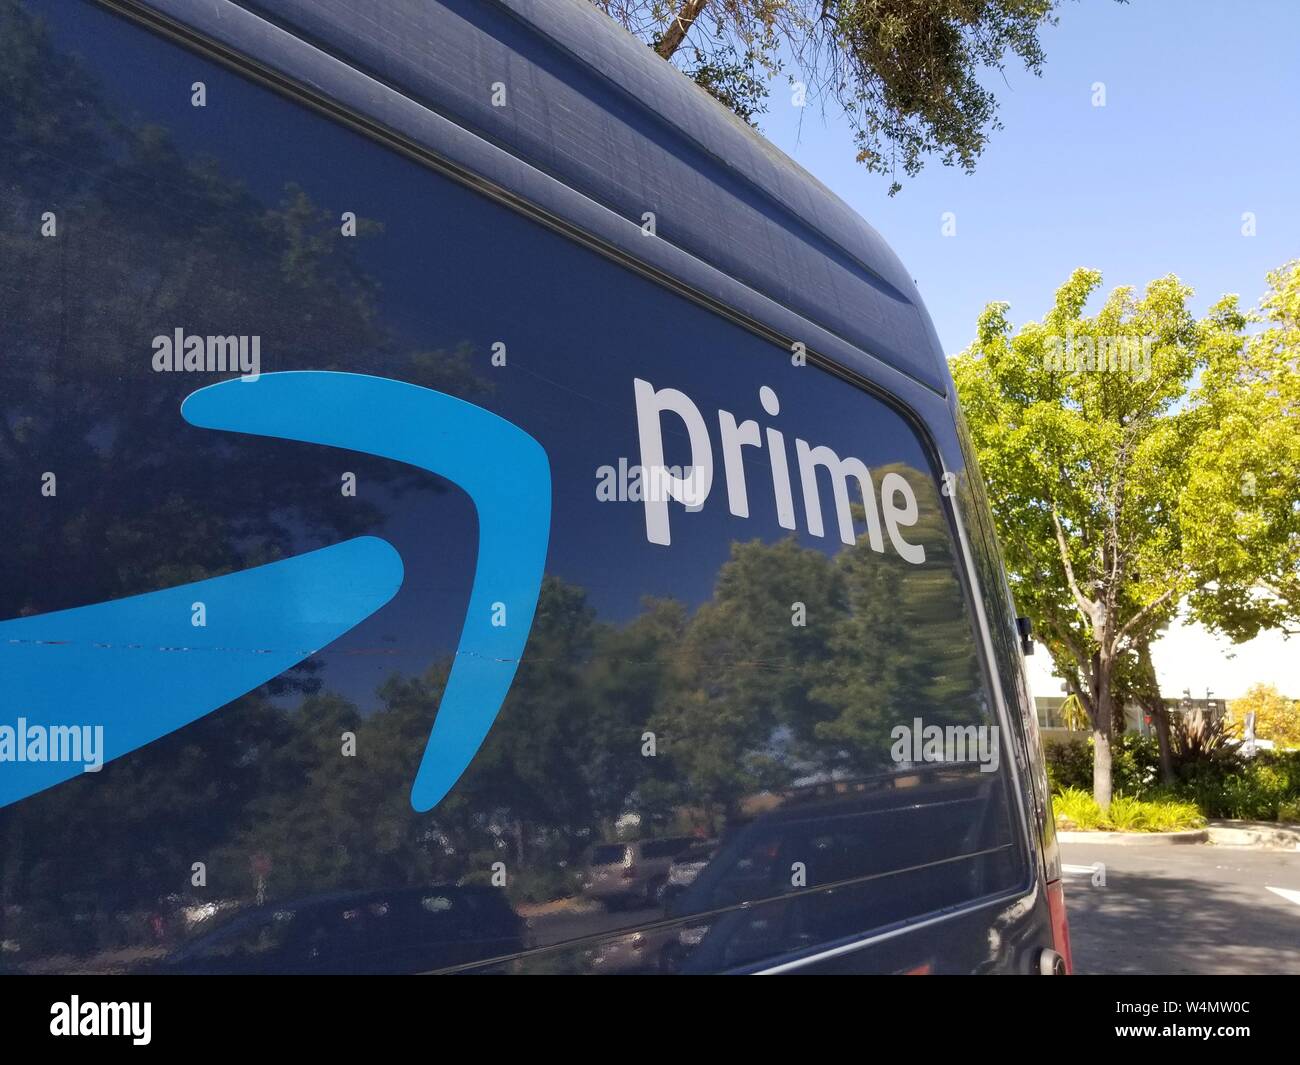 Close-up of logo for Amazon Prime service on the side of a branded delivery truck in San Ramon, California; Amazon announced that it would hire thousands more delivery drivers to increase 1 day shipping options beginning in 2019, July 12, 2019. () Stock Photo